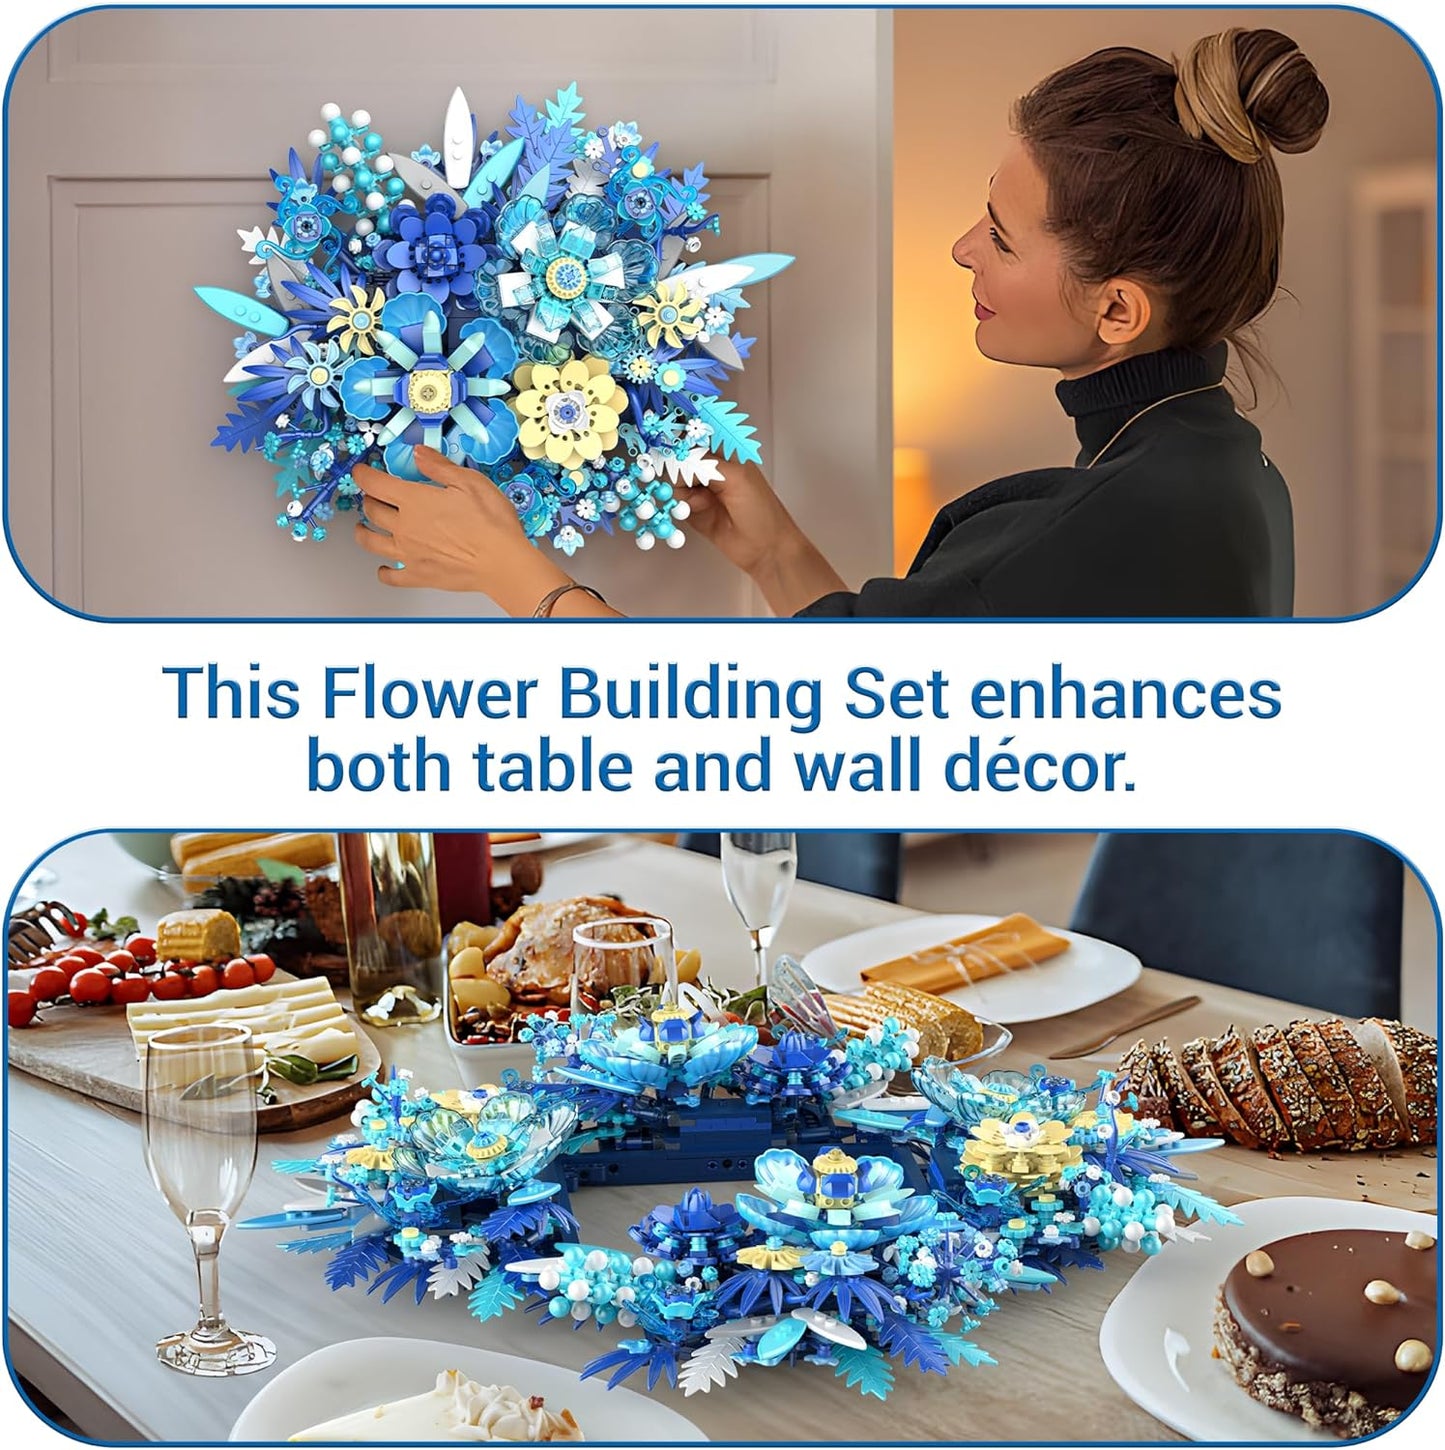 Flowers Building Set, Flower Centerpiece Building Blocks for Adults, Kids, Boys, Girls, Botanical Collection Crafts Set for Table or Wall Decor, Ideal Gifts for Mother's Day, Valentines Day, Birthday